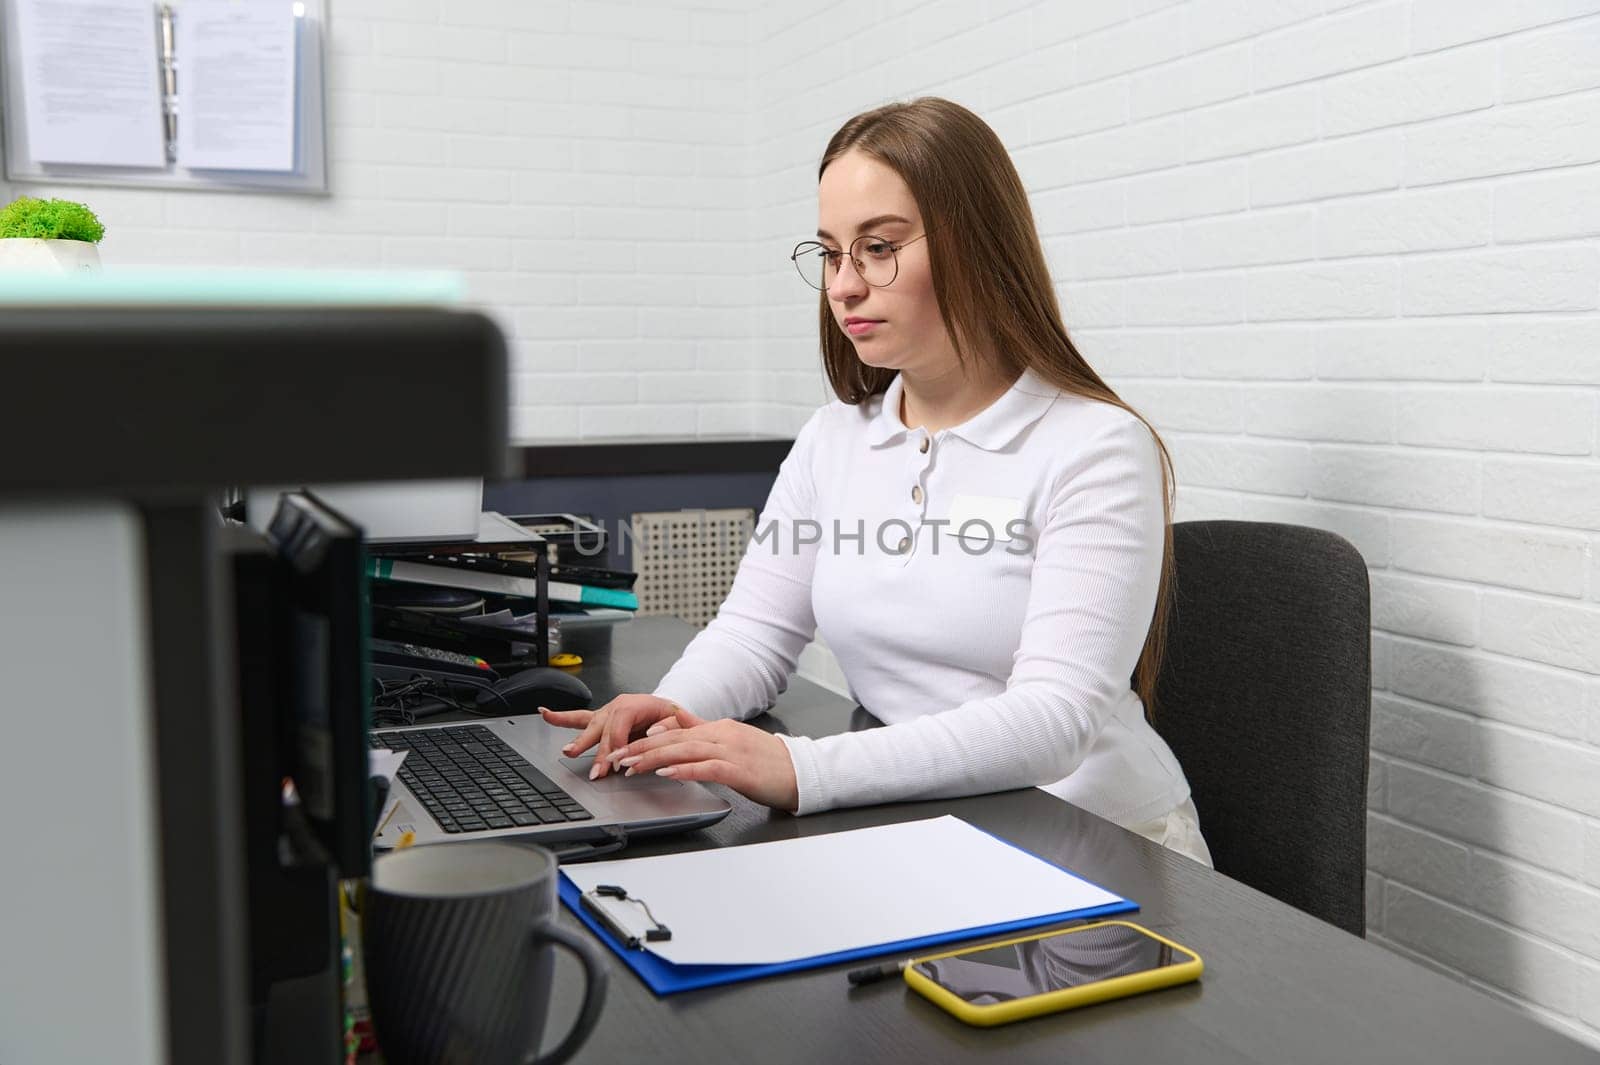 Receptionist works on laptop, sitting behind a reception desk in modern clinic, keeping appointments with medical staff by artgf